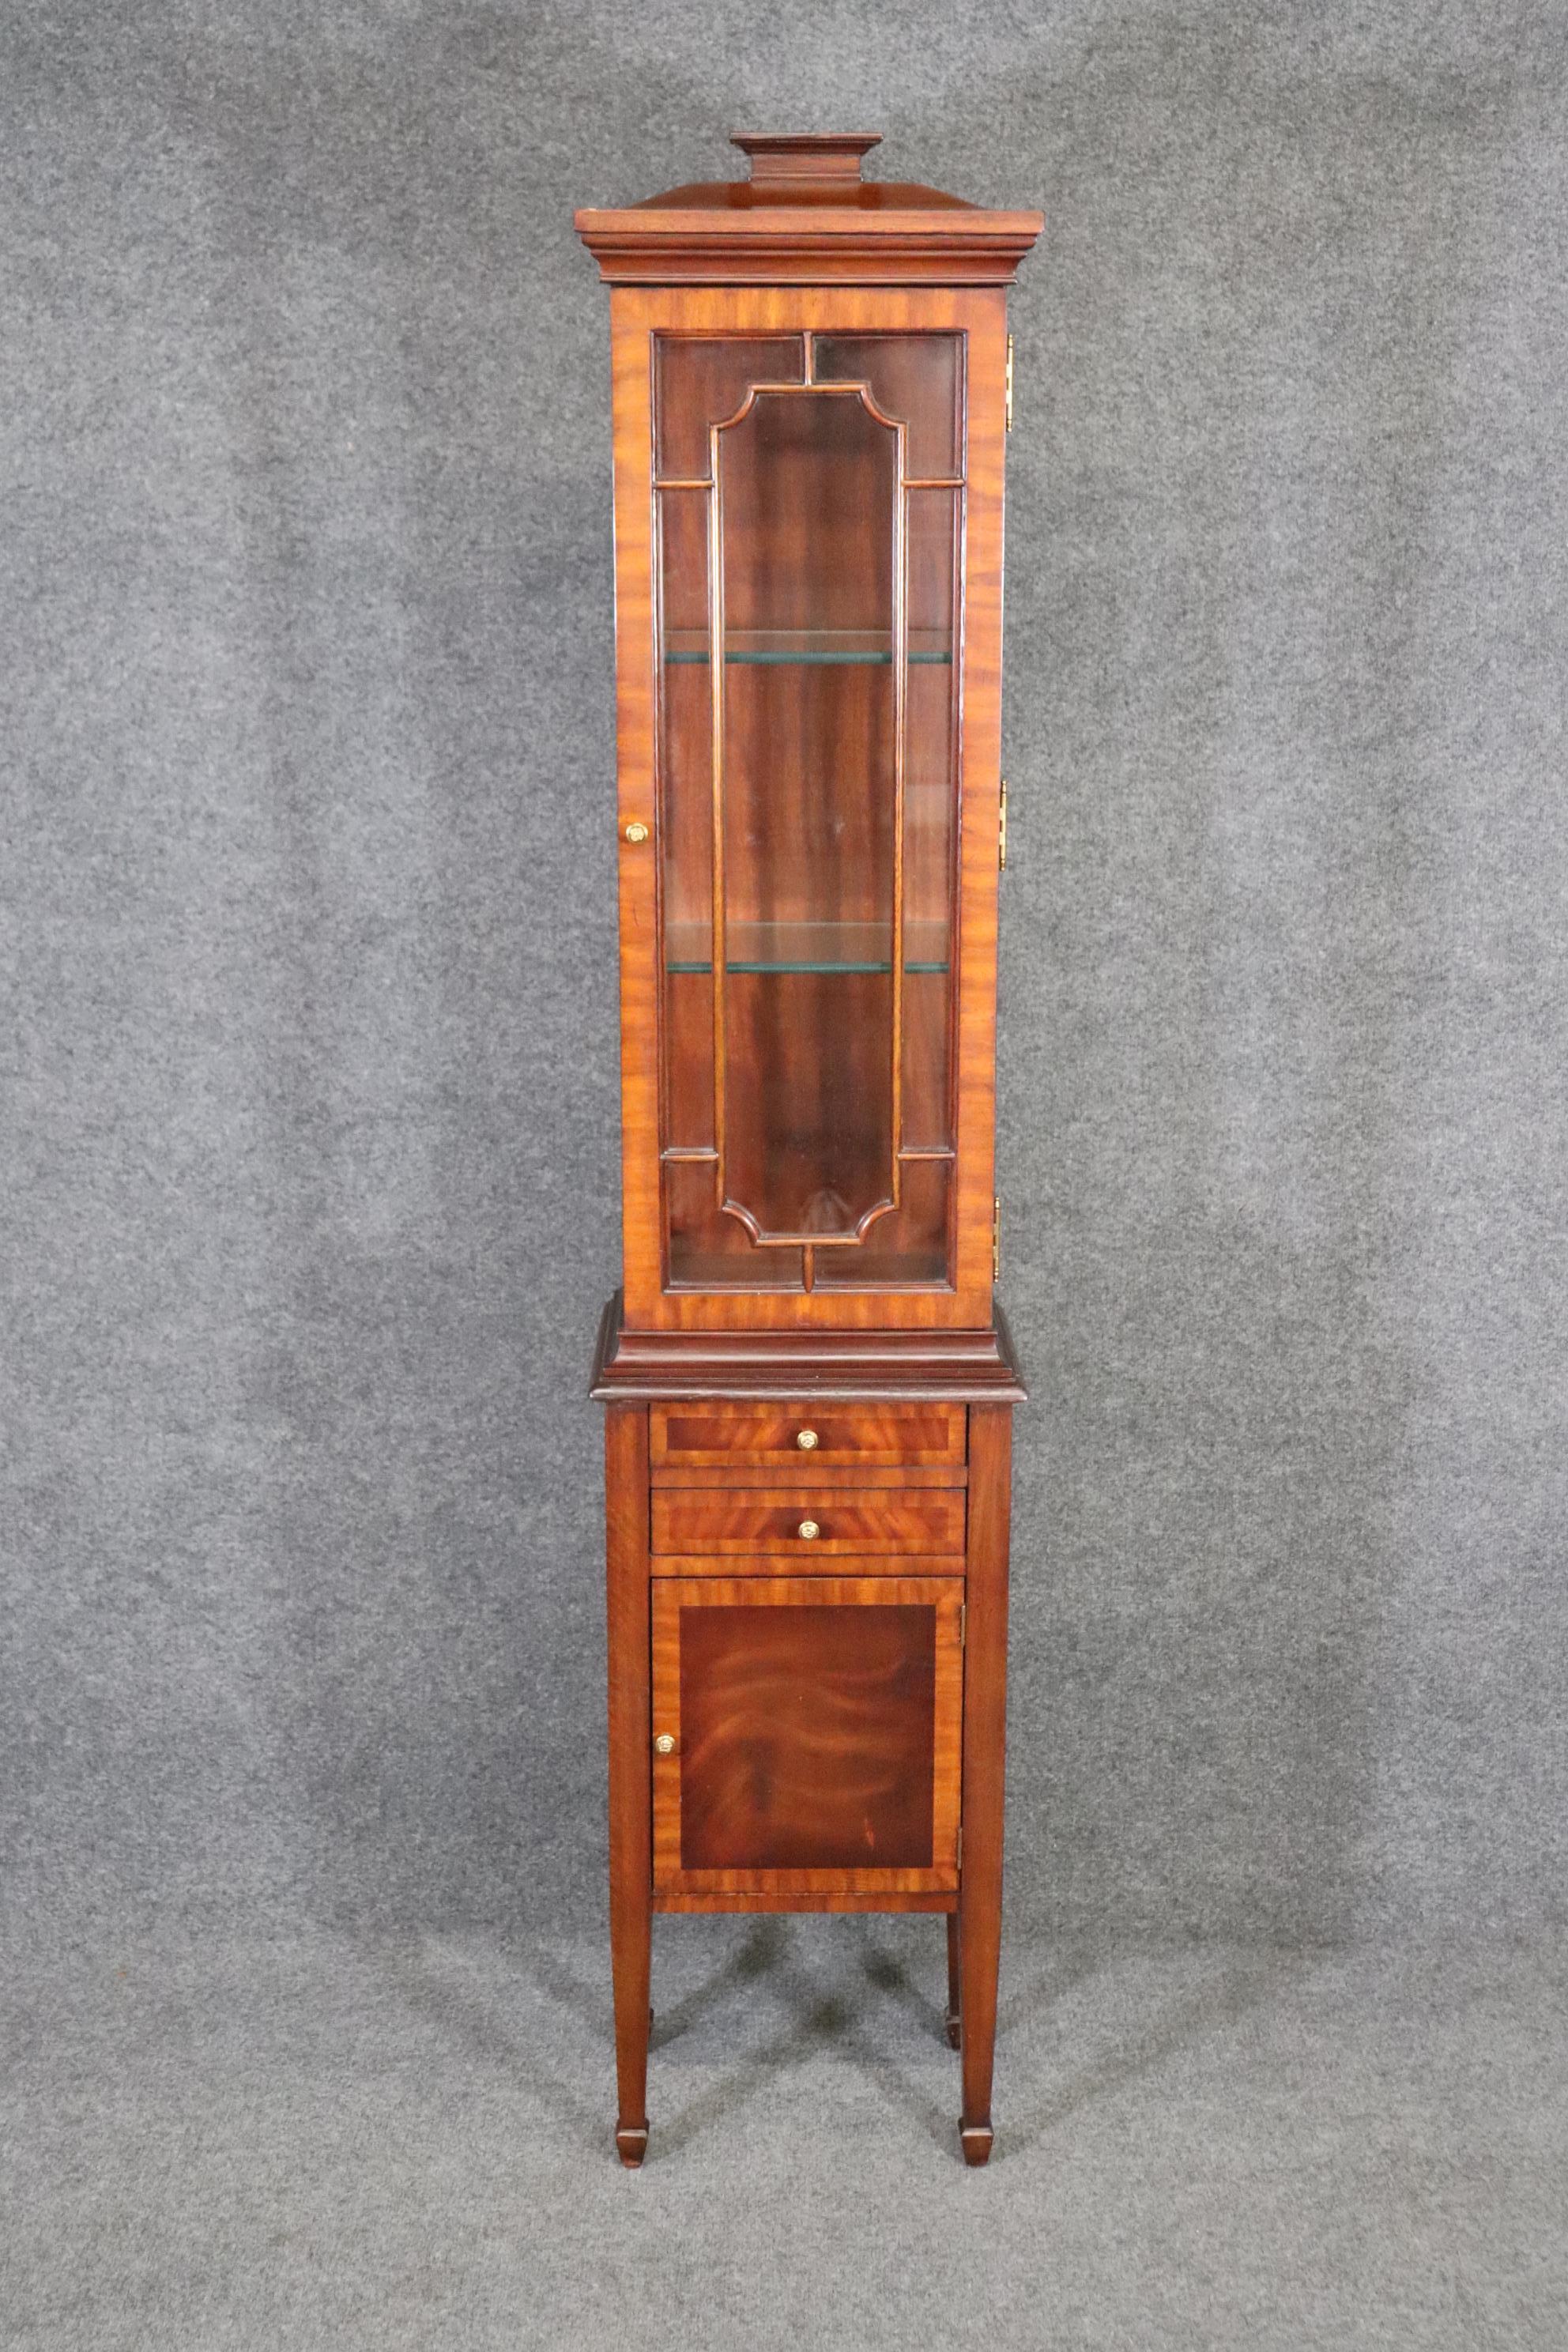 This is a gorgeous mahogany and glass EXTREMELY narrow vitrine or china cabinet. It's perfect for photos framed of loved ones or small collectibles to display in a limited space. The cabinet is a 2 piece high quality cabinet with a pogoda shaped top